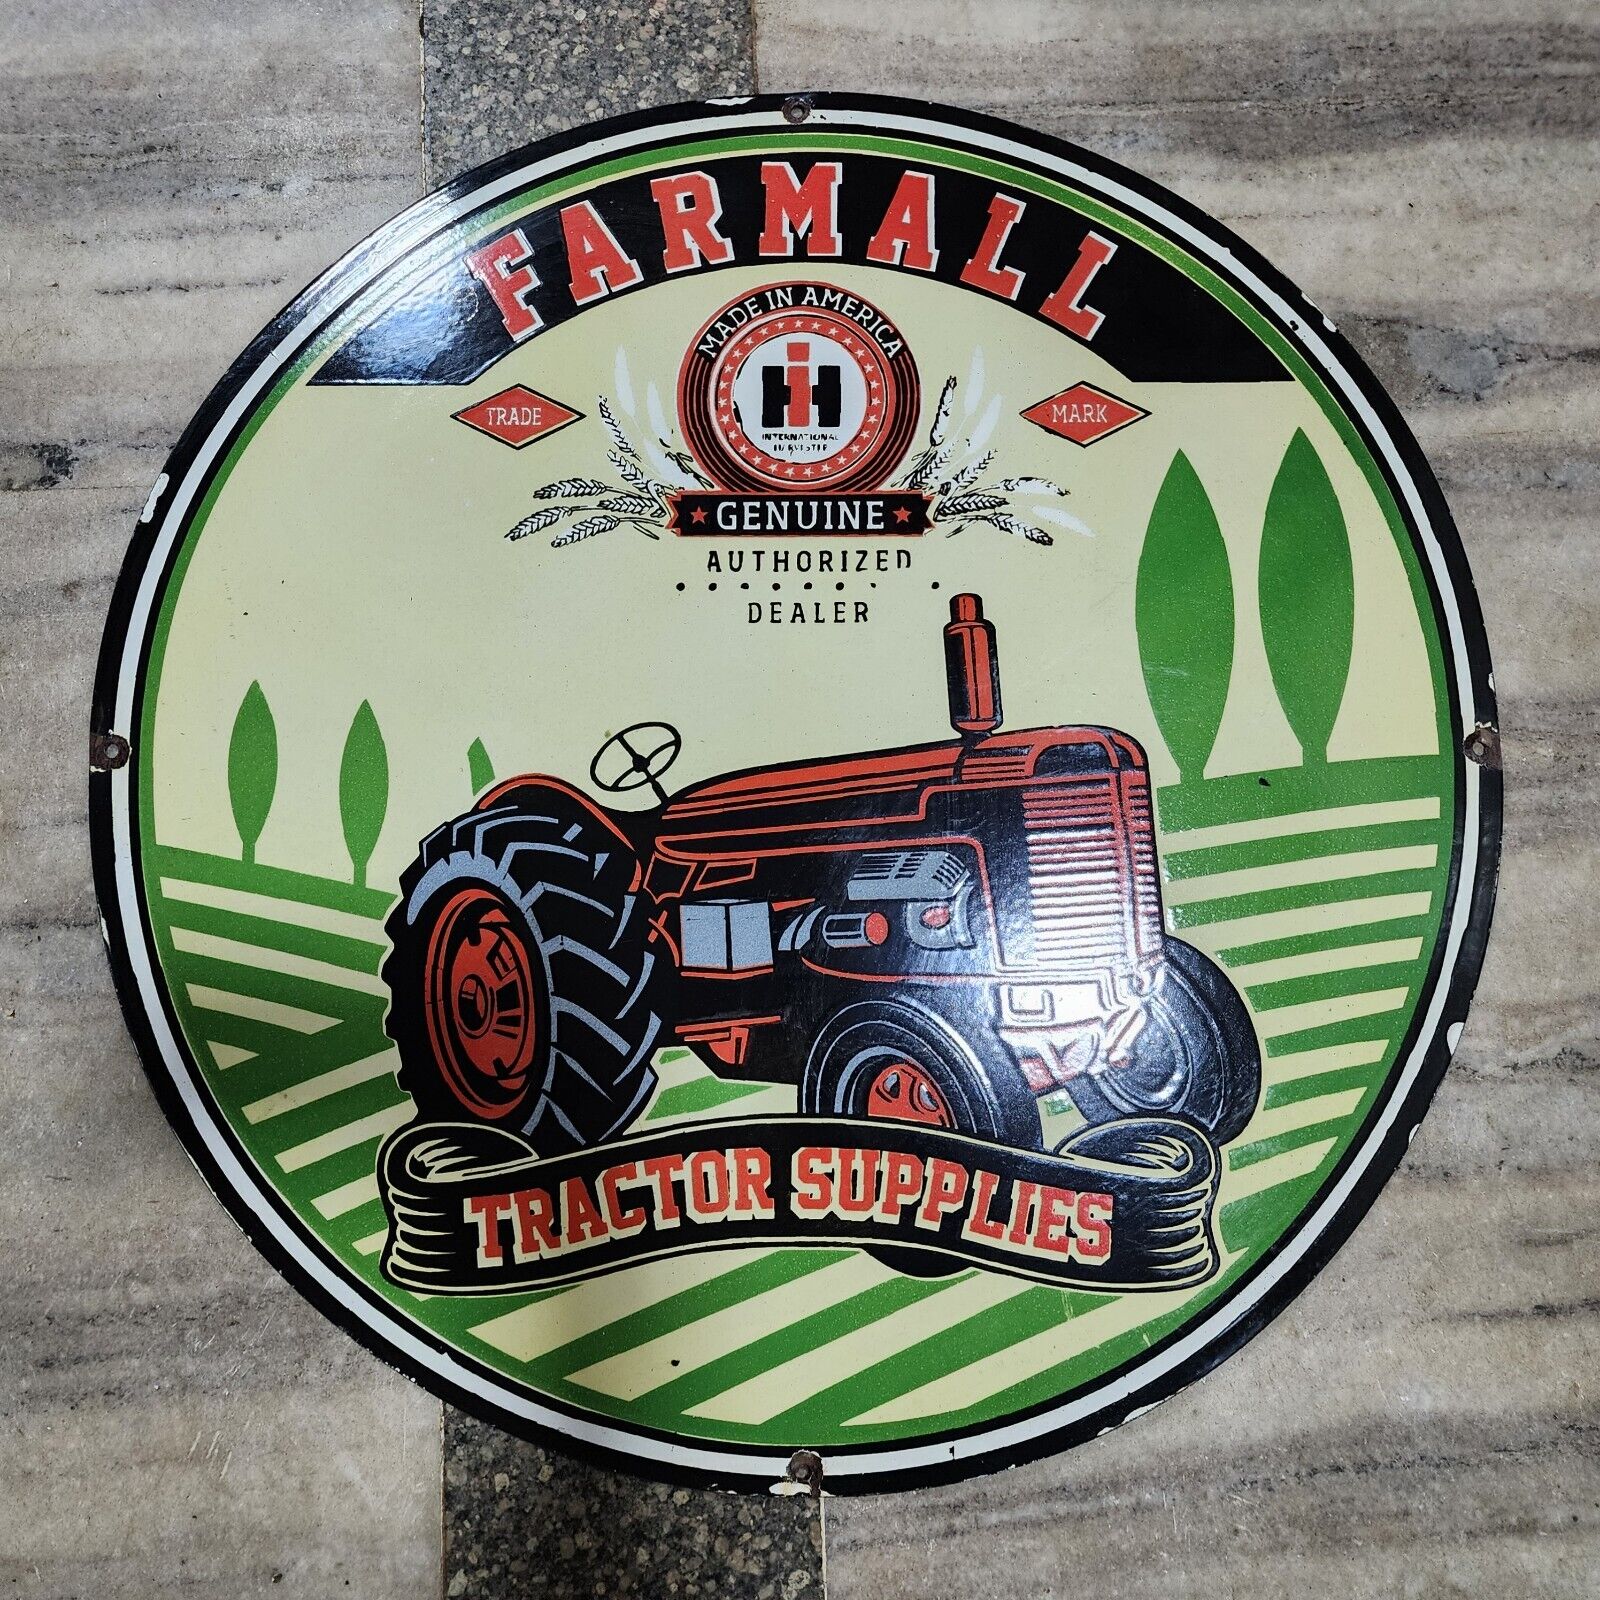 FARMALL TRACTOR PORCELAIN ENAMEL SIGN 30 INCHES ROUND